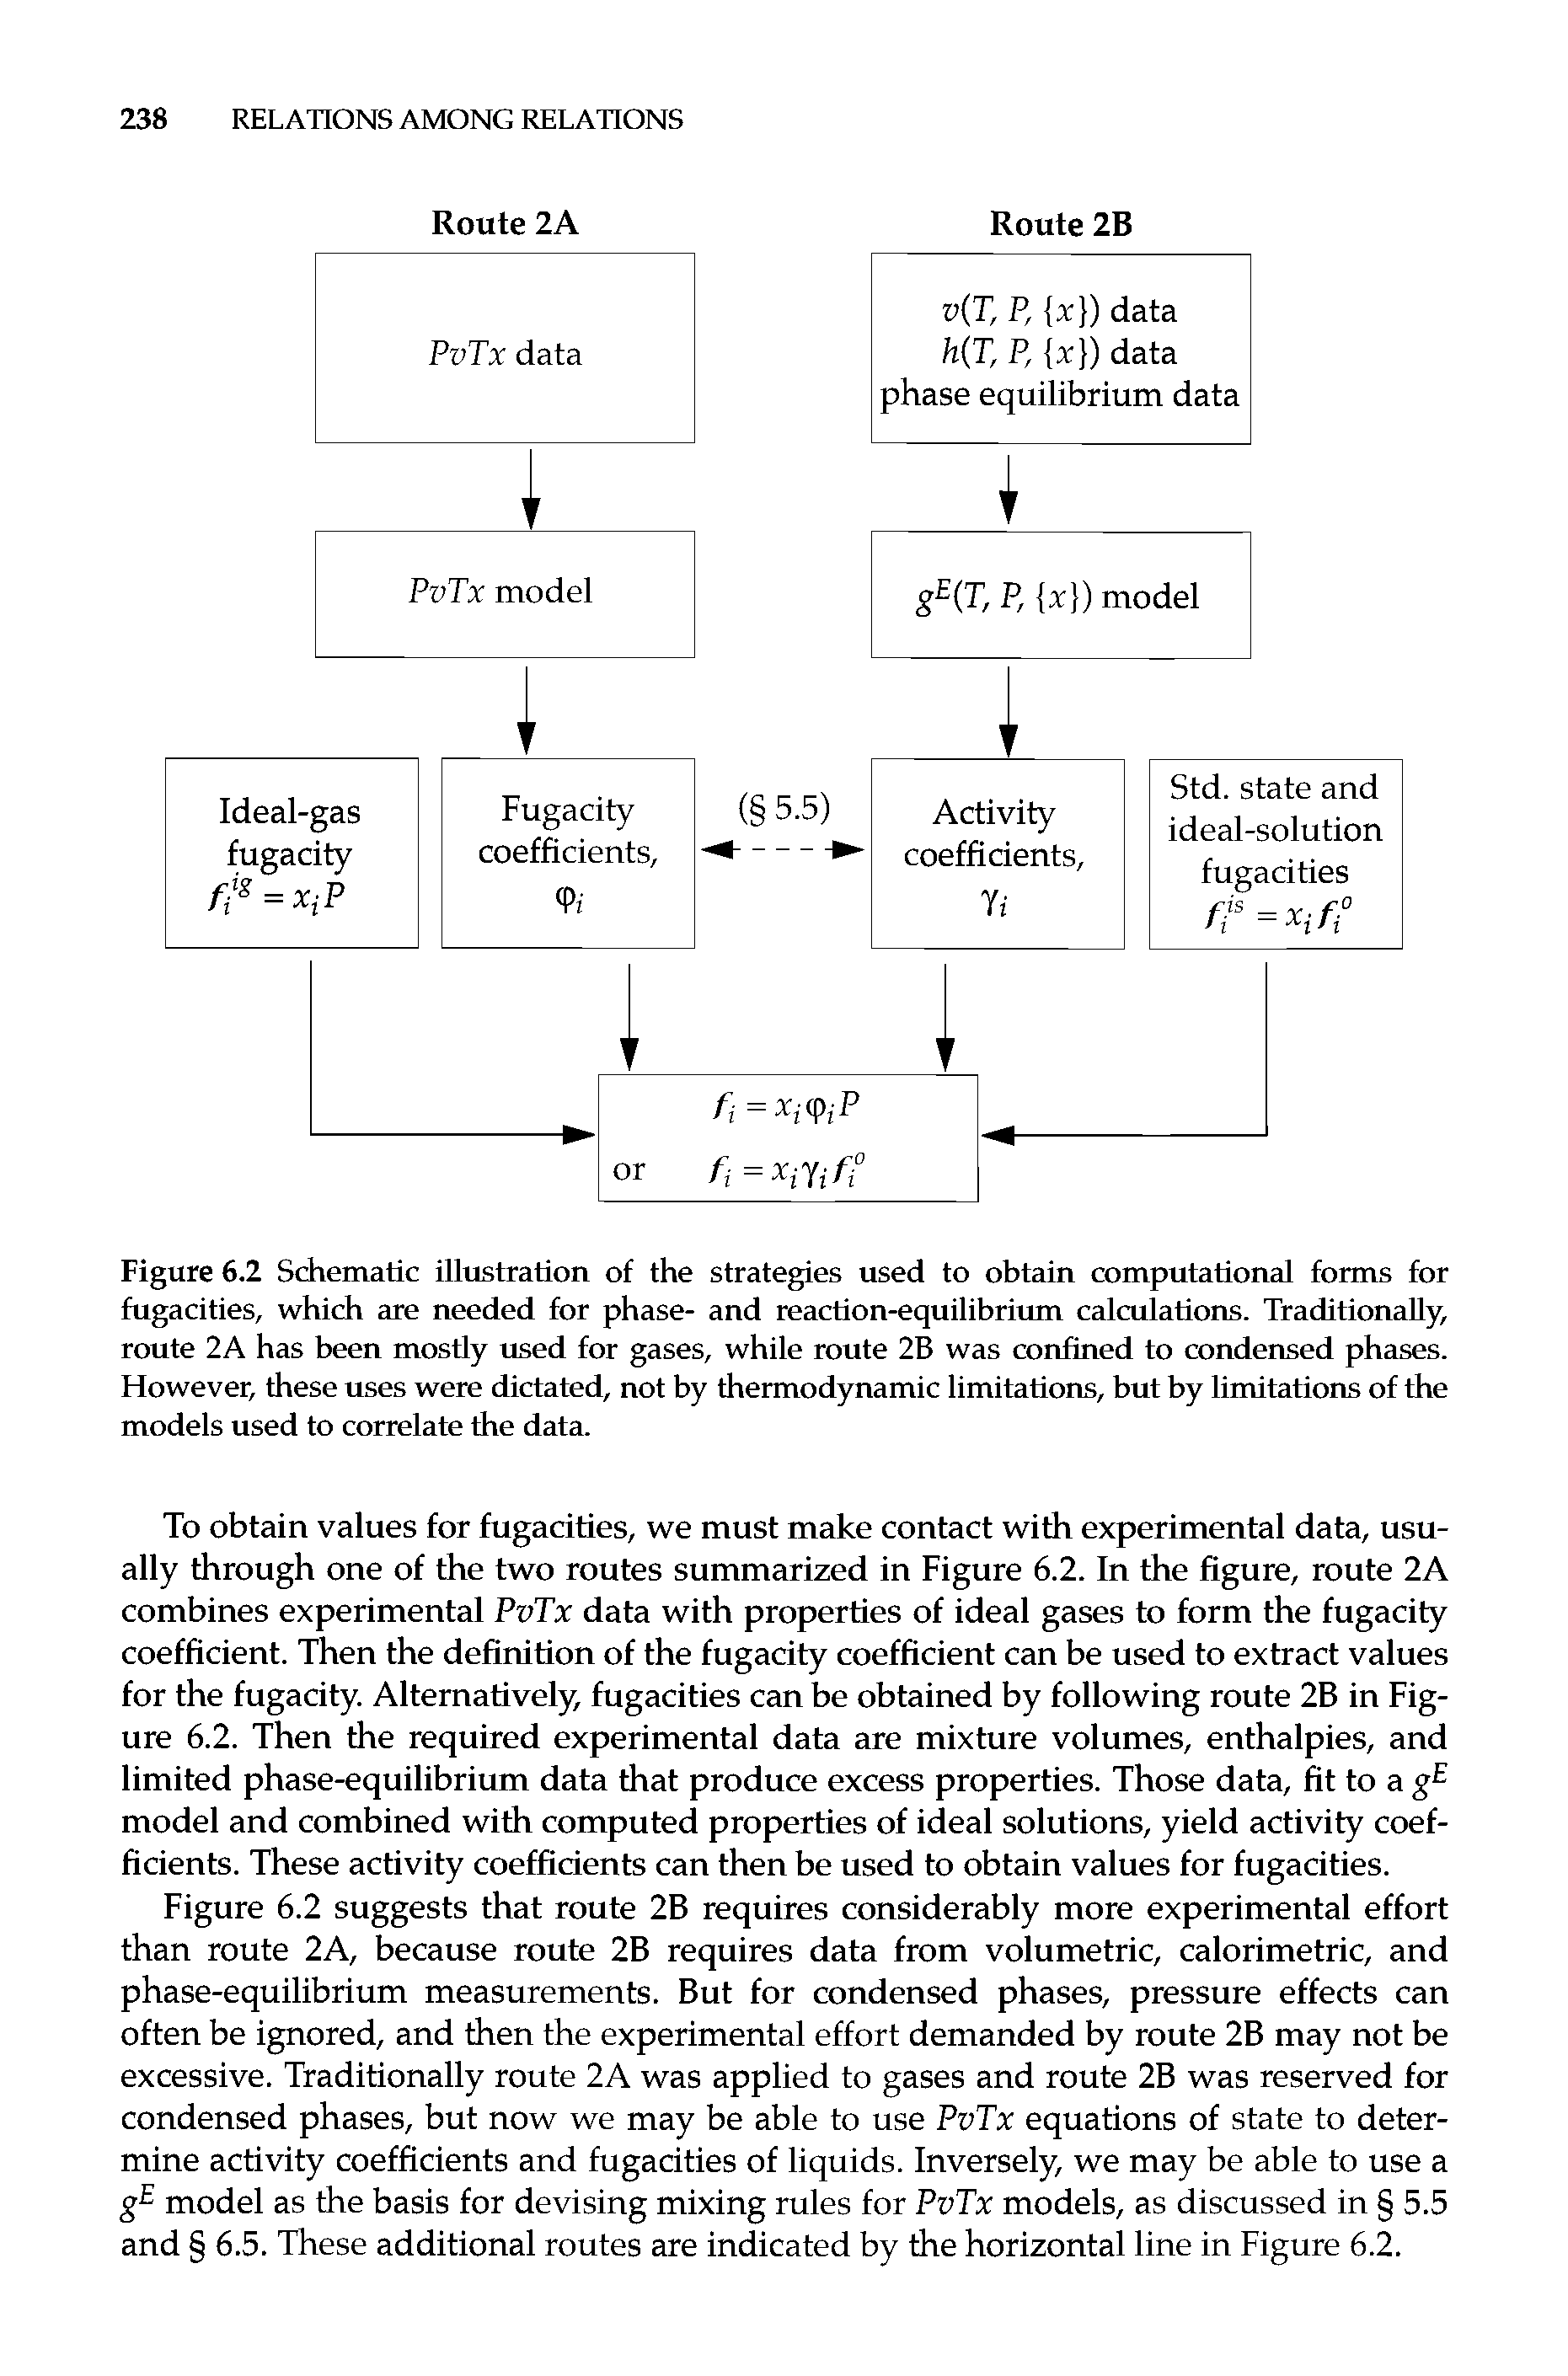 Figure 6.2 Schematic illustration of the strategies used to obtain computational forms for fugacities, which are needed for phase- and reaction-equilibrium calculations. Traditionally, route 2A has been mostly used for gases, while route 2B was confined to condensed phases. However, these uses were dictated, not by thermodynamic limitations, but by limitations of the models used to correlate the data.